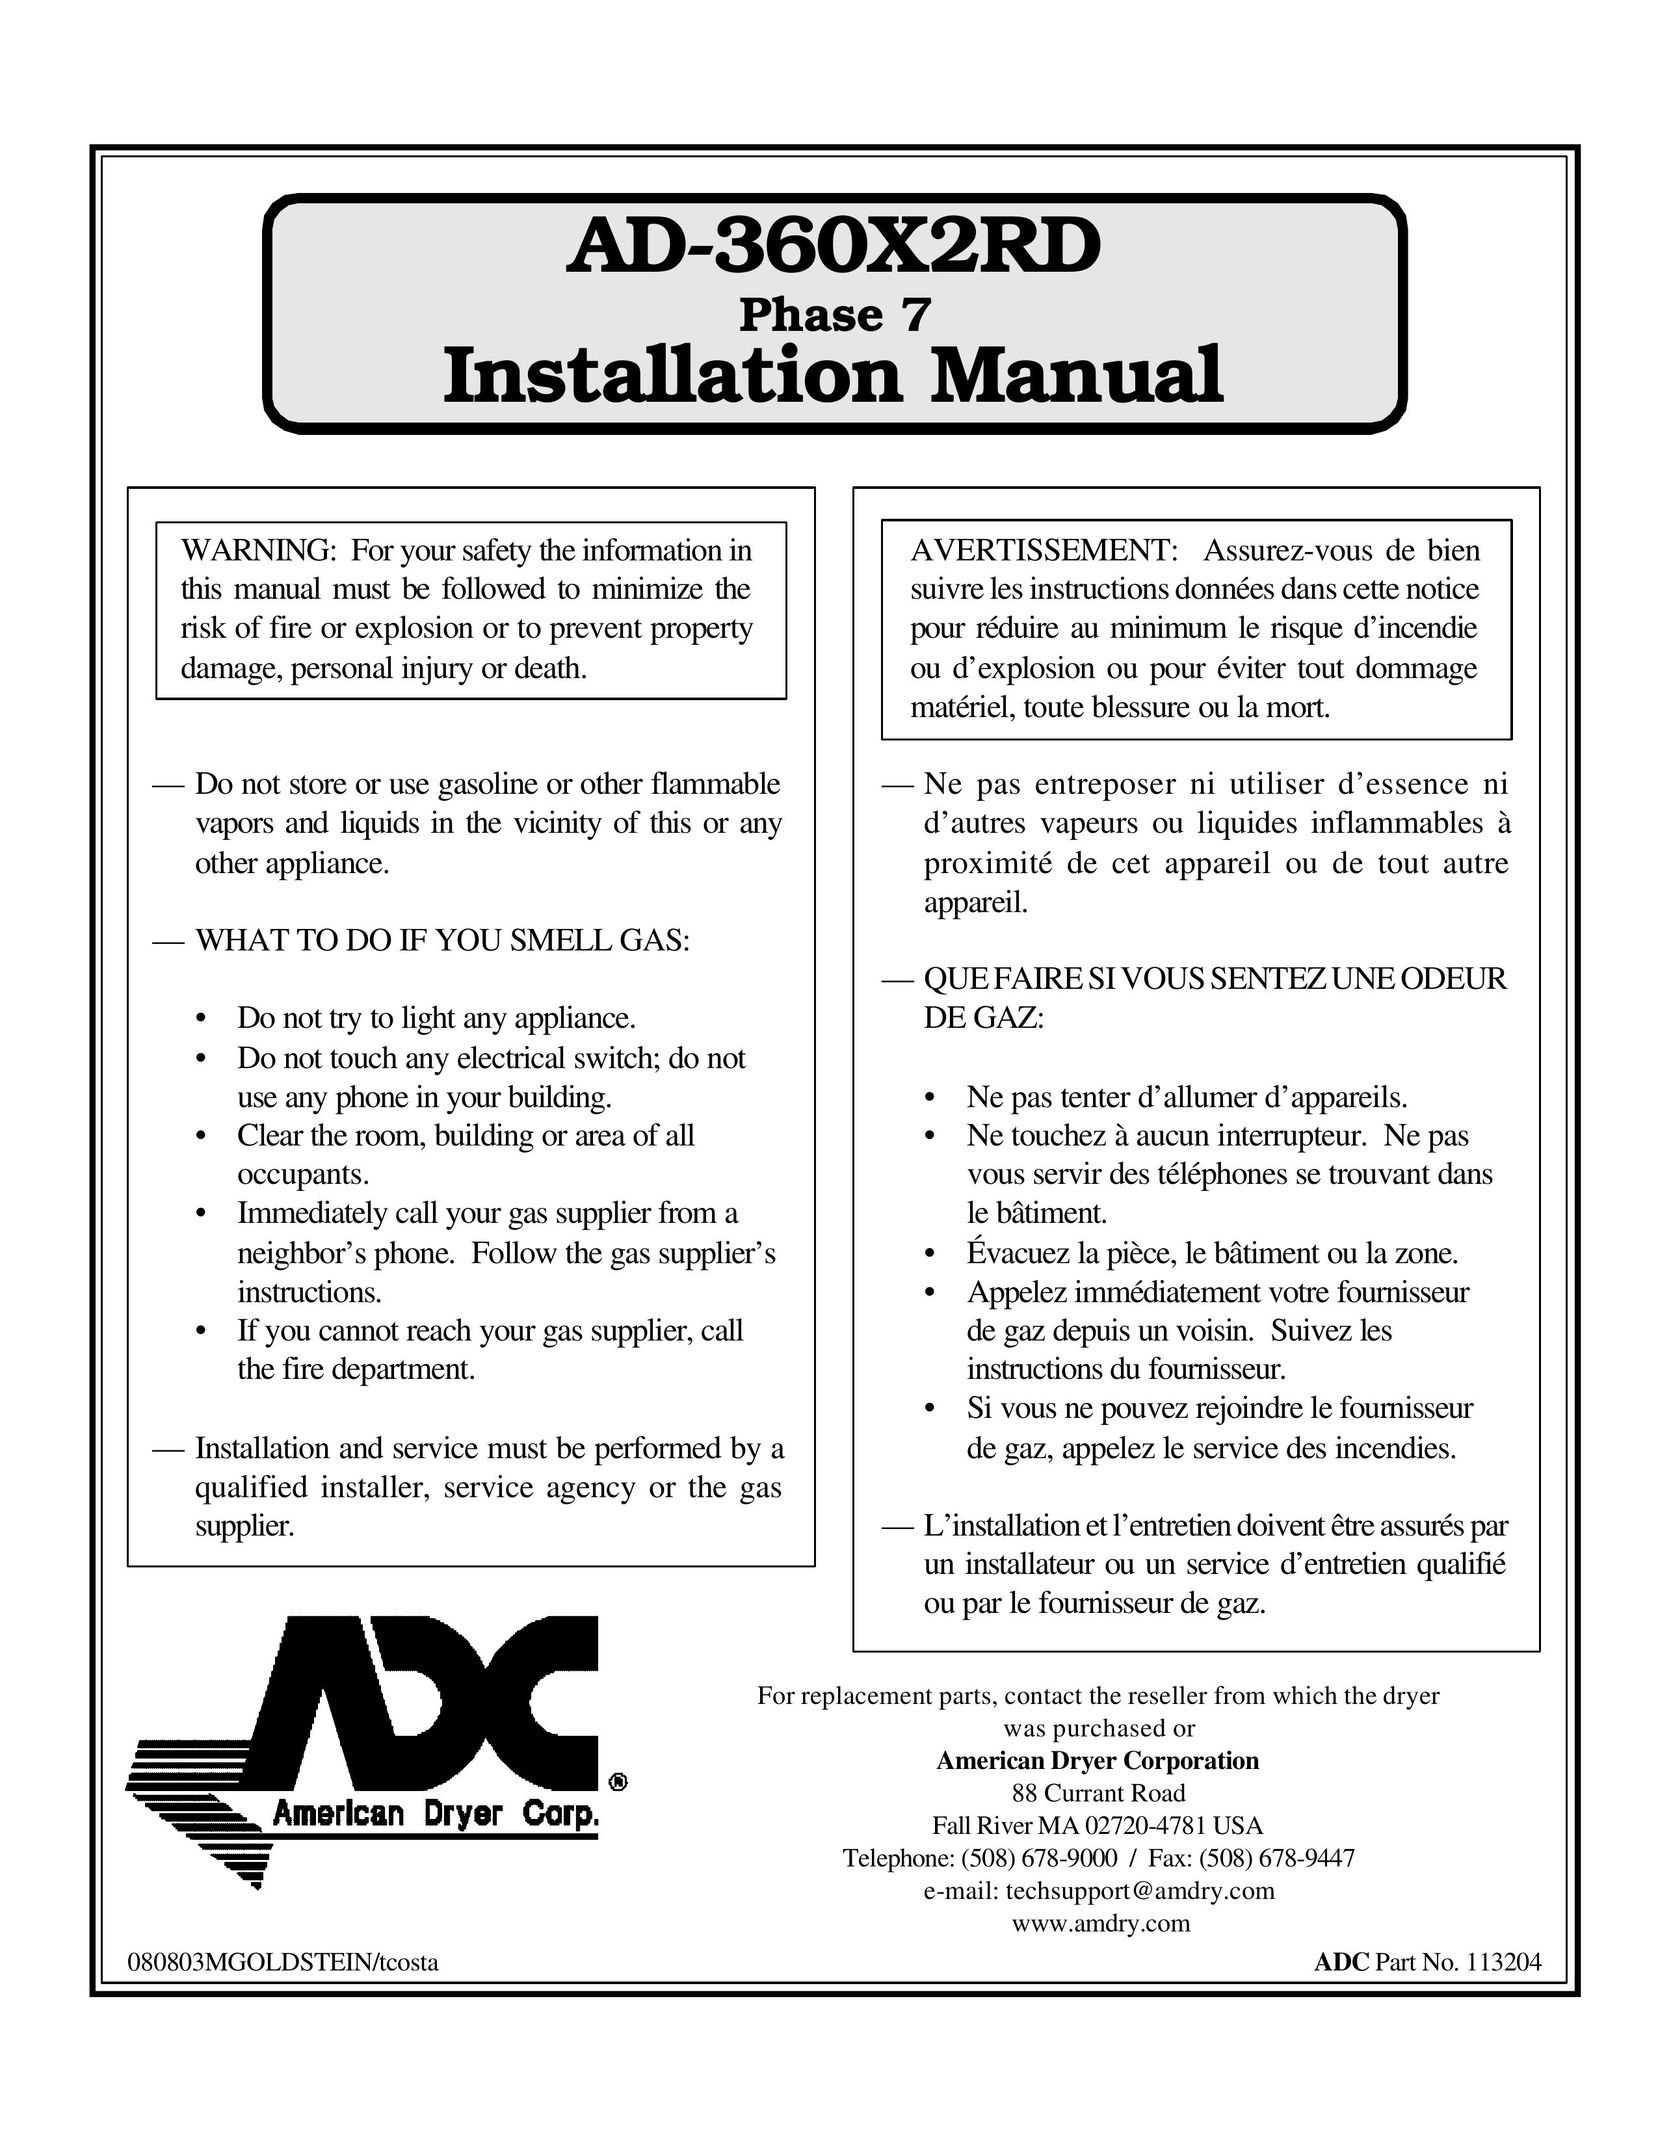 American Dryer Corp. AD-360X2RD Computer Monitor User Manual